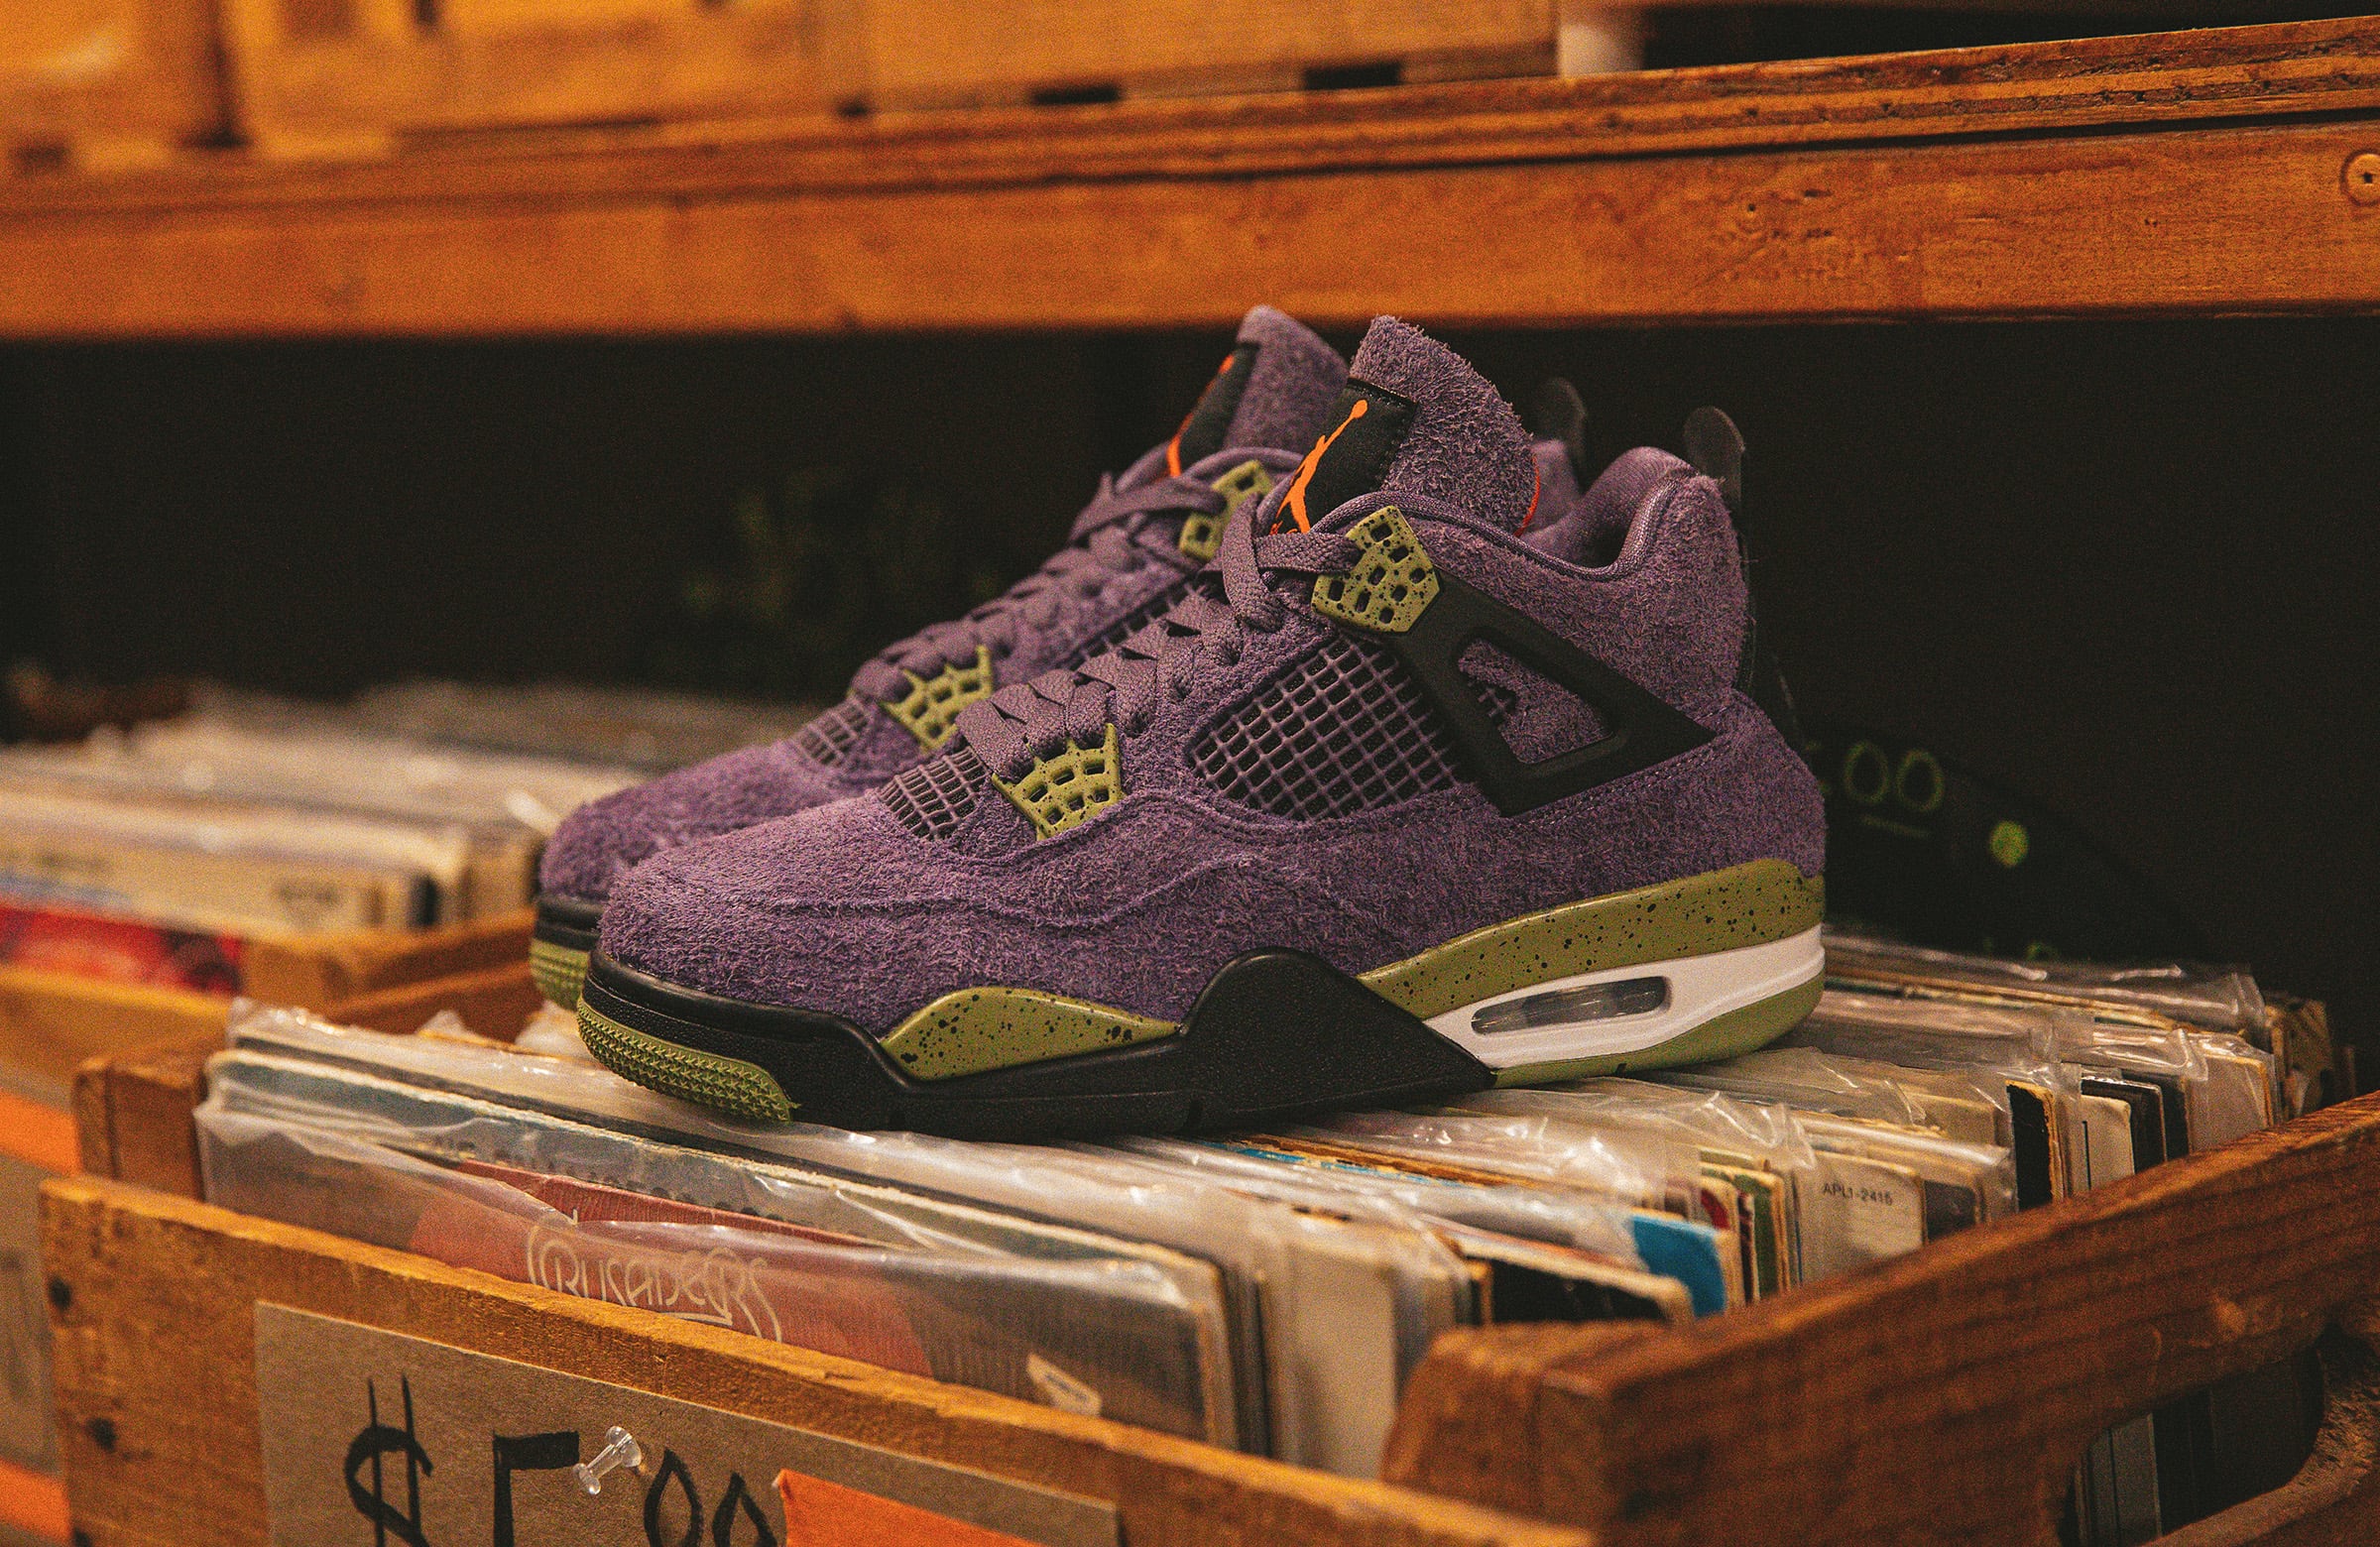 Where to Buy the Air Jordan 4 Retro “Canyon Purple” – DTLR